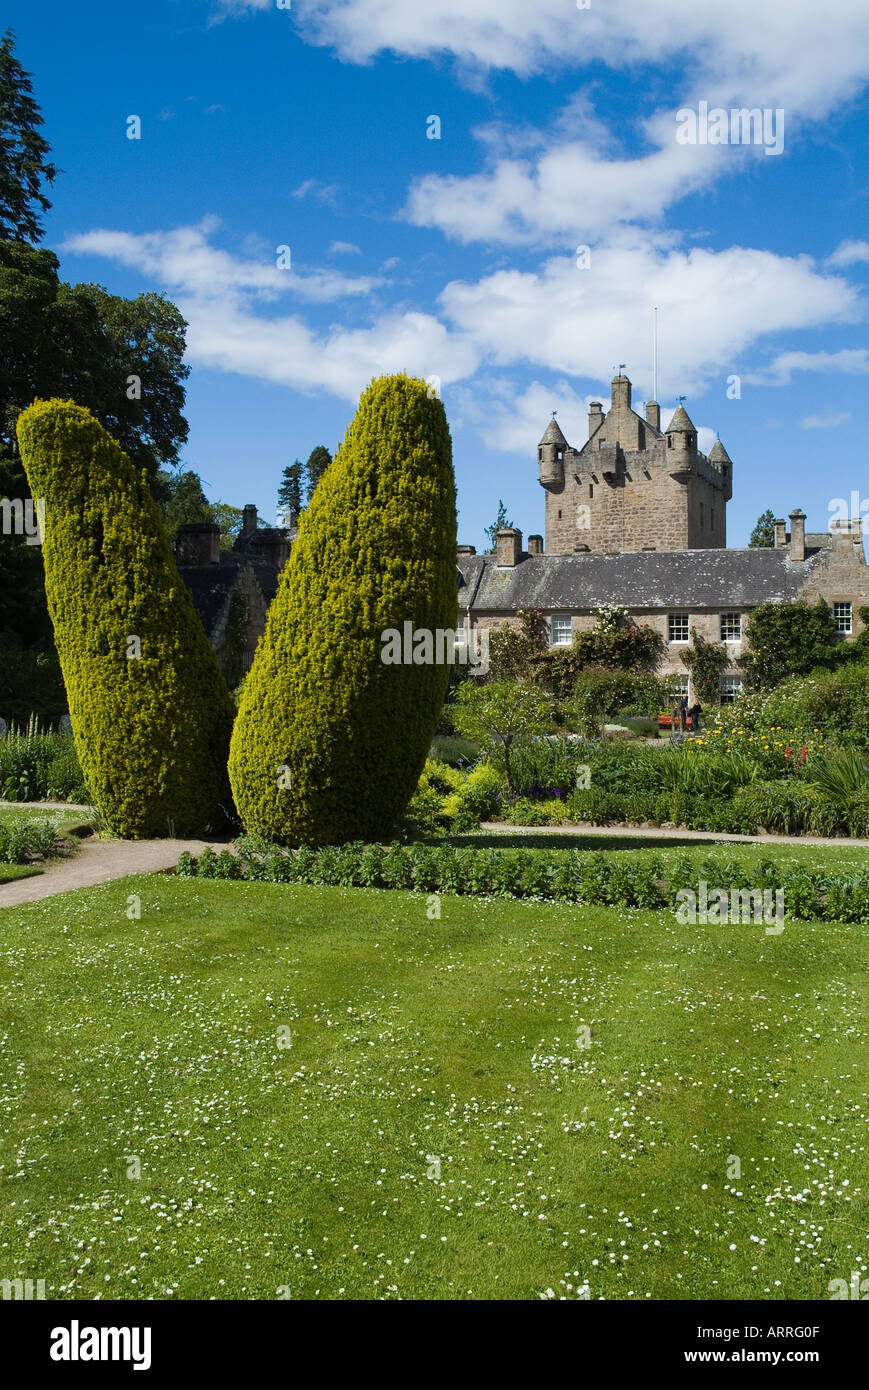 dh Tower house gardens Scotland CAWDOR CASTLE INVERNESSSHIRE Scottish Yew pillars tree hedge garden hedges highlands taxus baccata uk historic Stock Photo